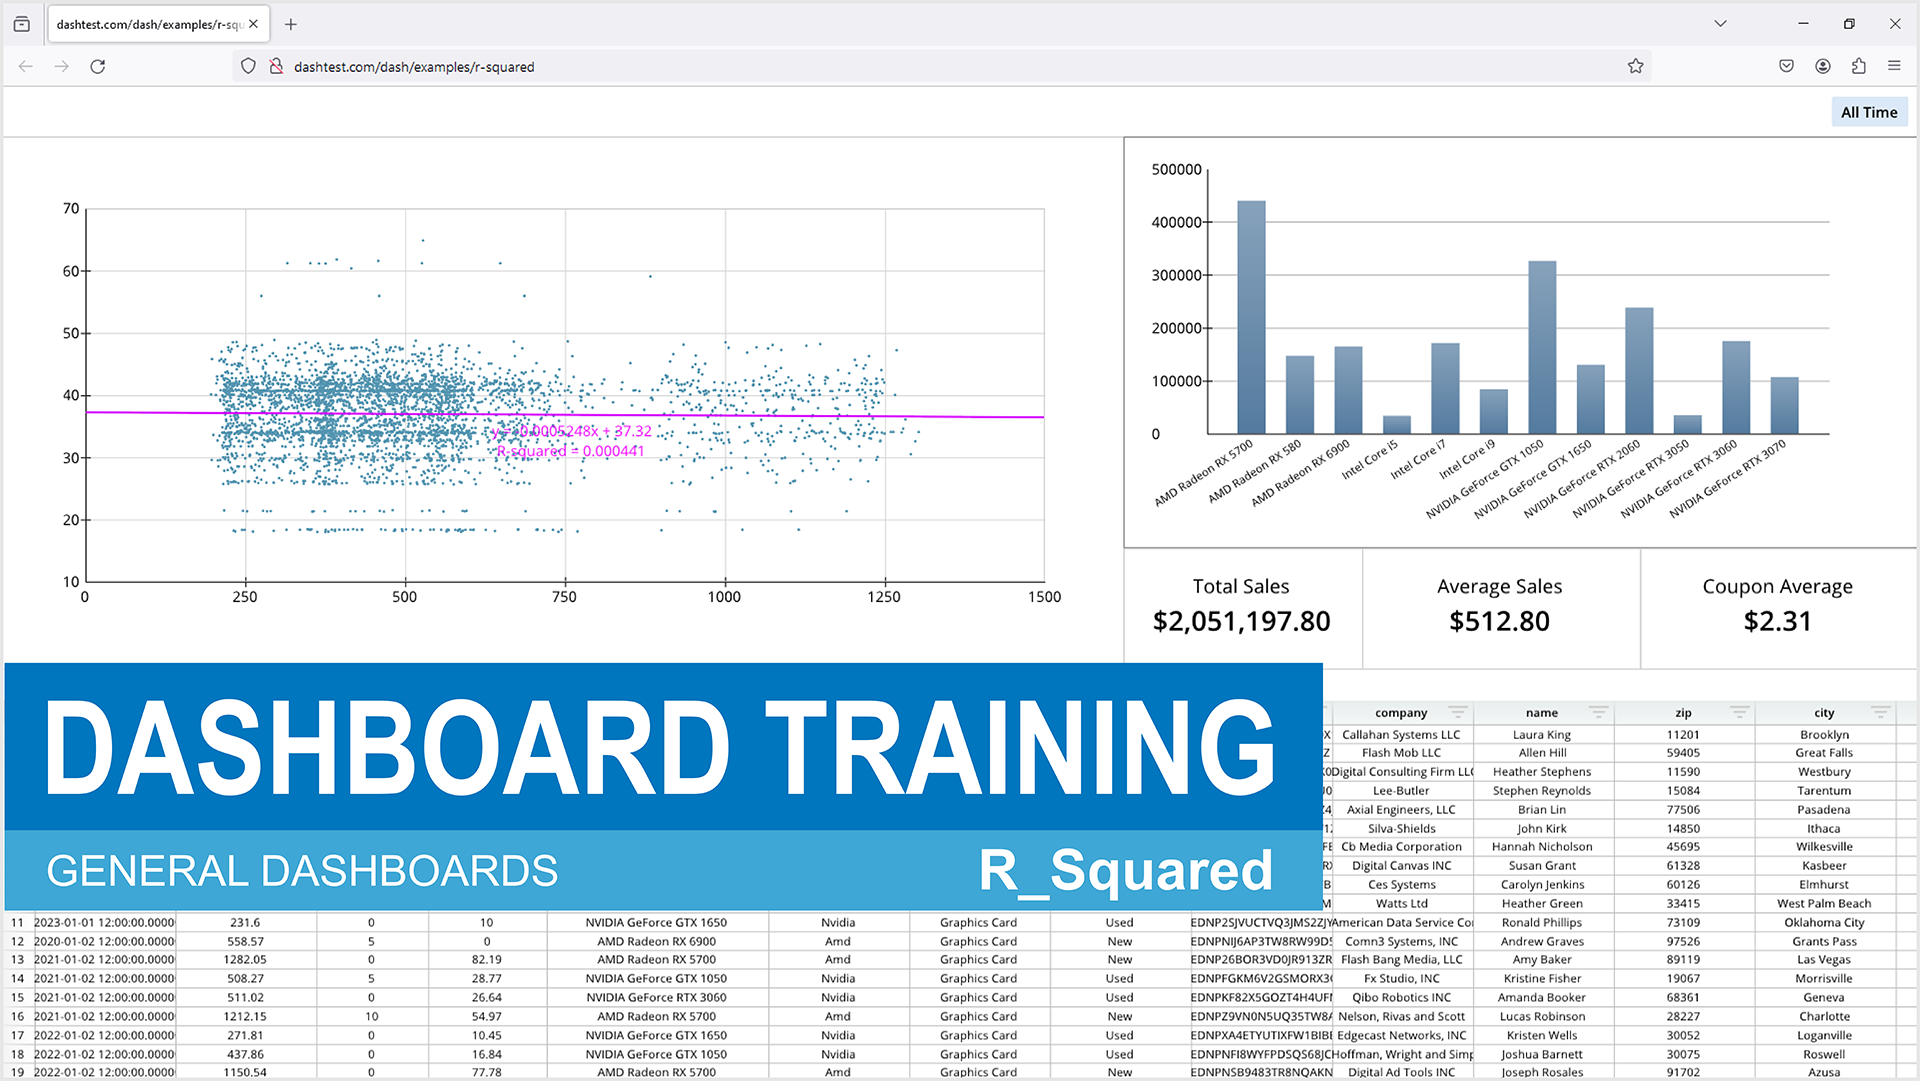 A screenshot of a dashboard training program, displaying various graphs and data points.